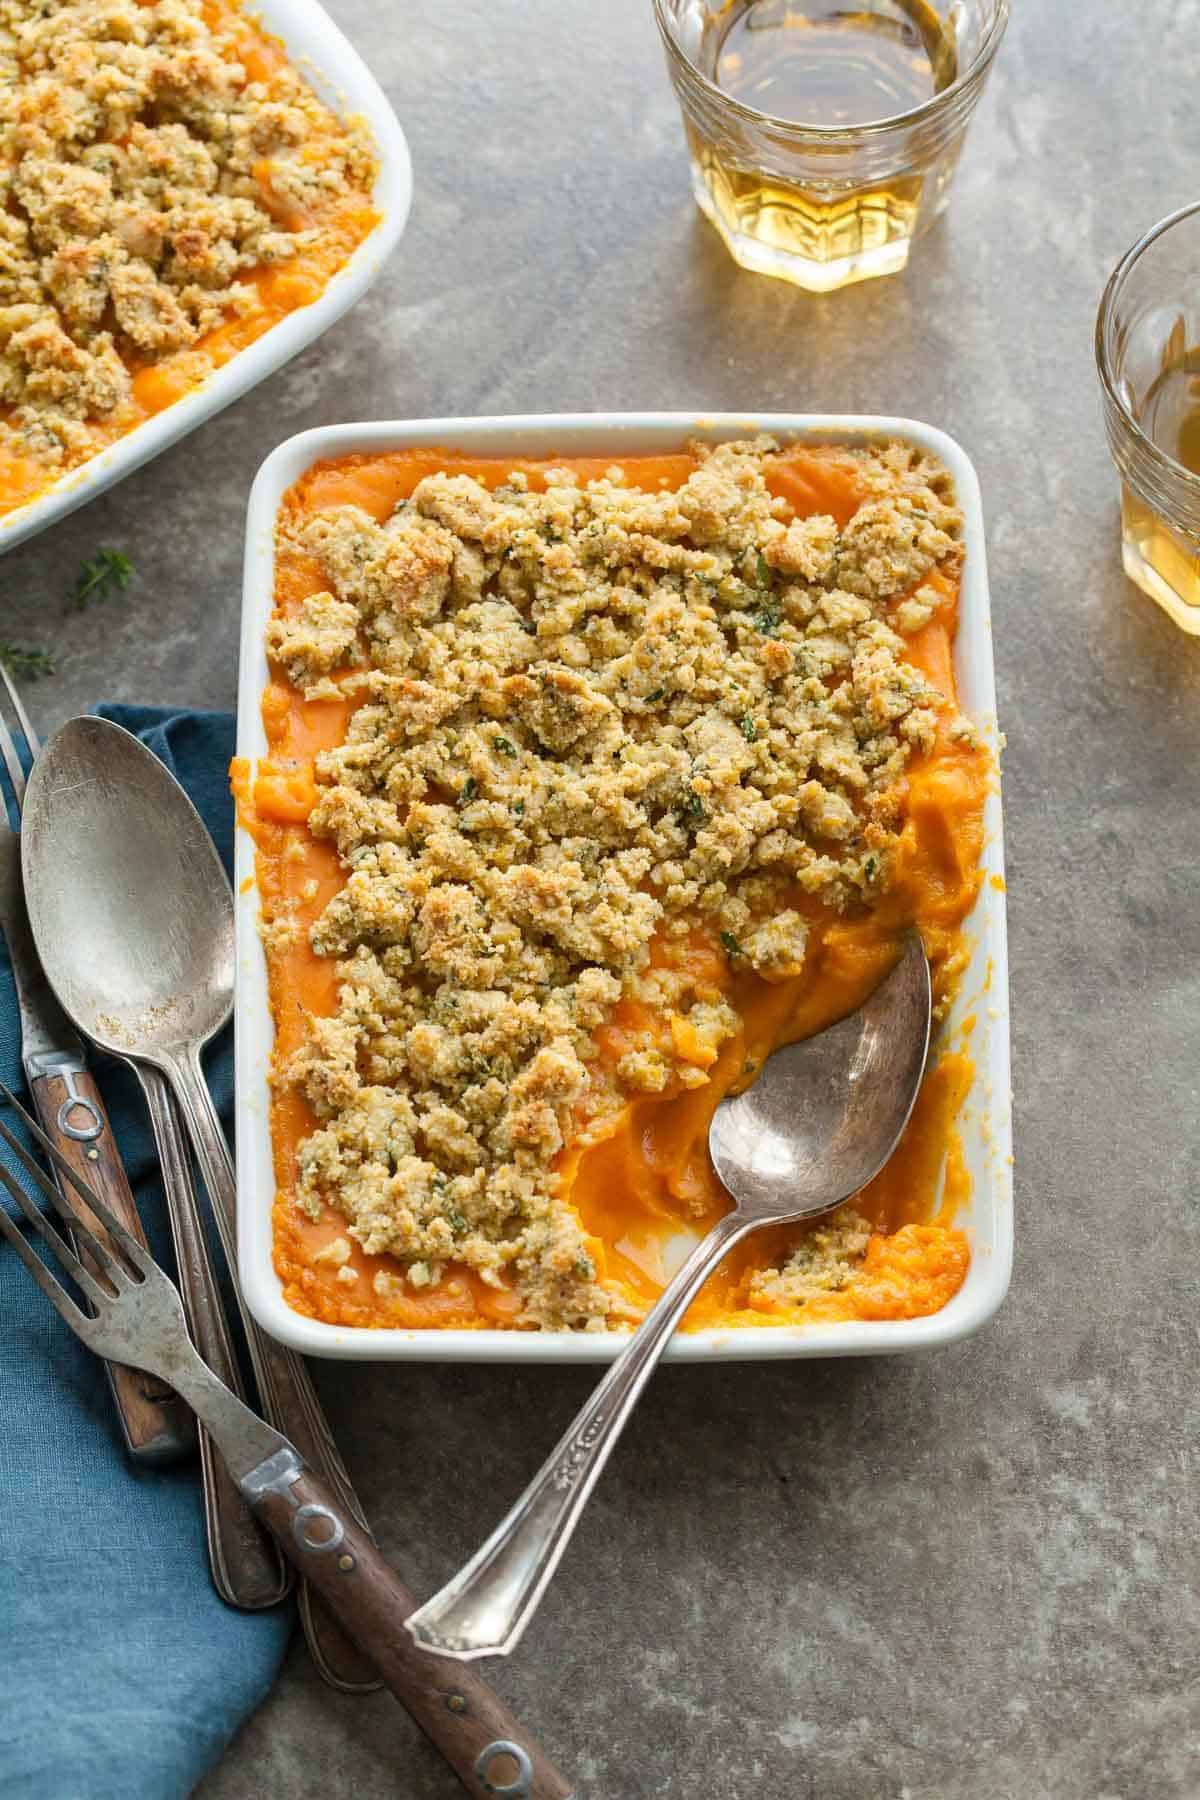 Sweet Potato Butternut Squash Gratin (Paleo, Vegan) - This thyme scented sweet potato and butternut squash gratin is a savory alternative to the usual sweet potato casserole this holiday season.